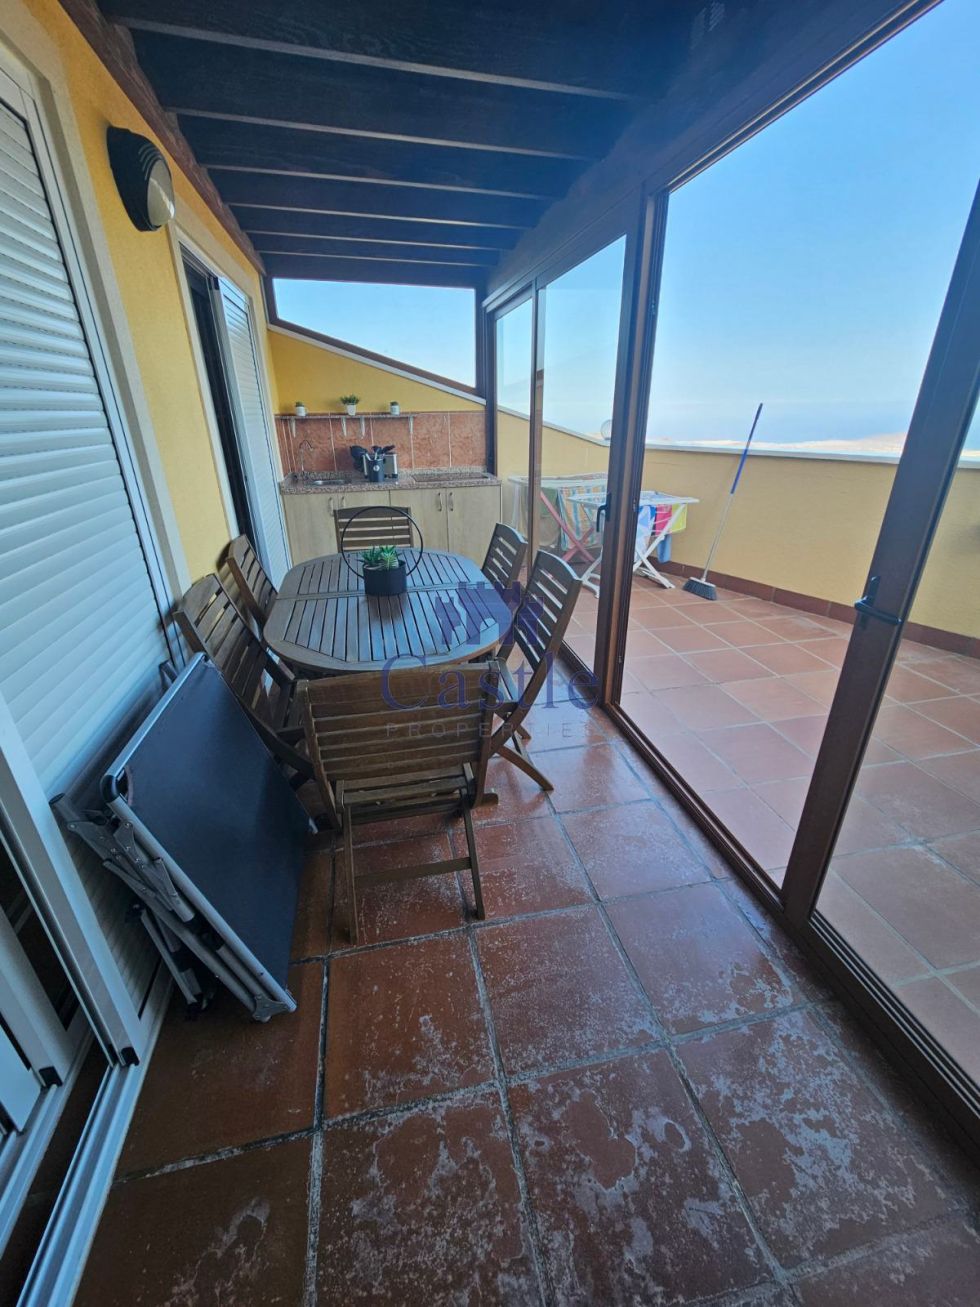 Semi-detached house for sale in  San Miguel, Spain - 23612